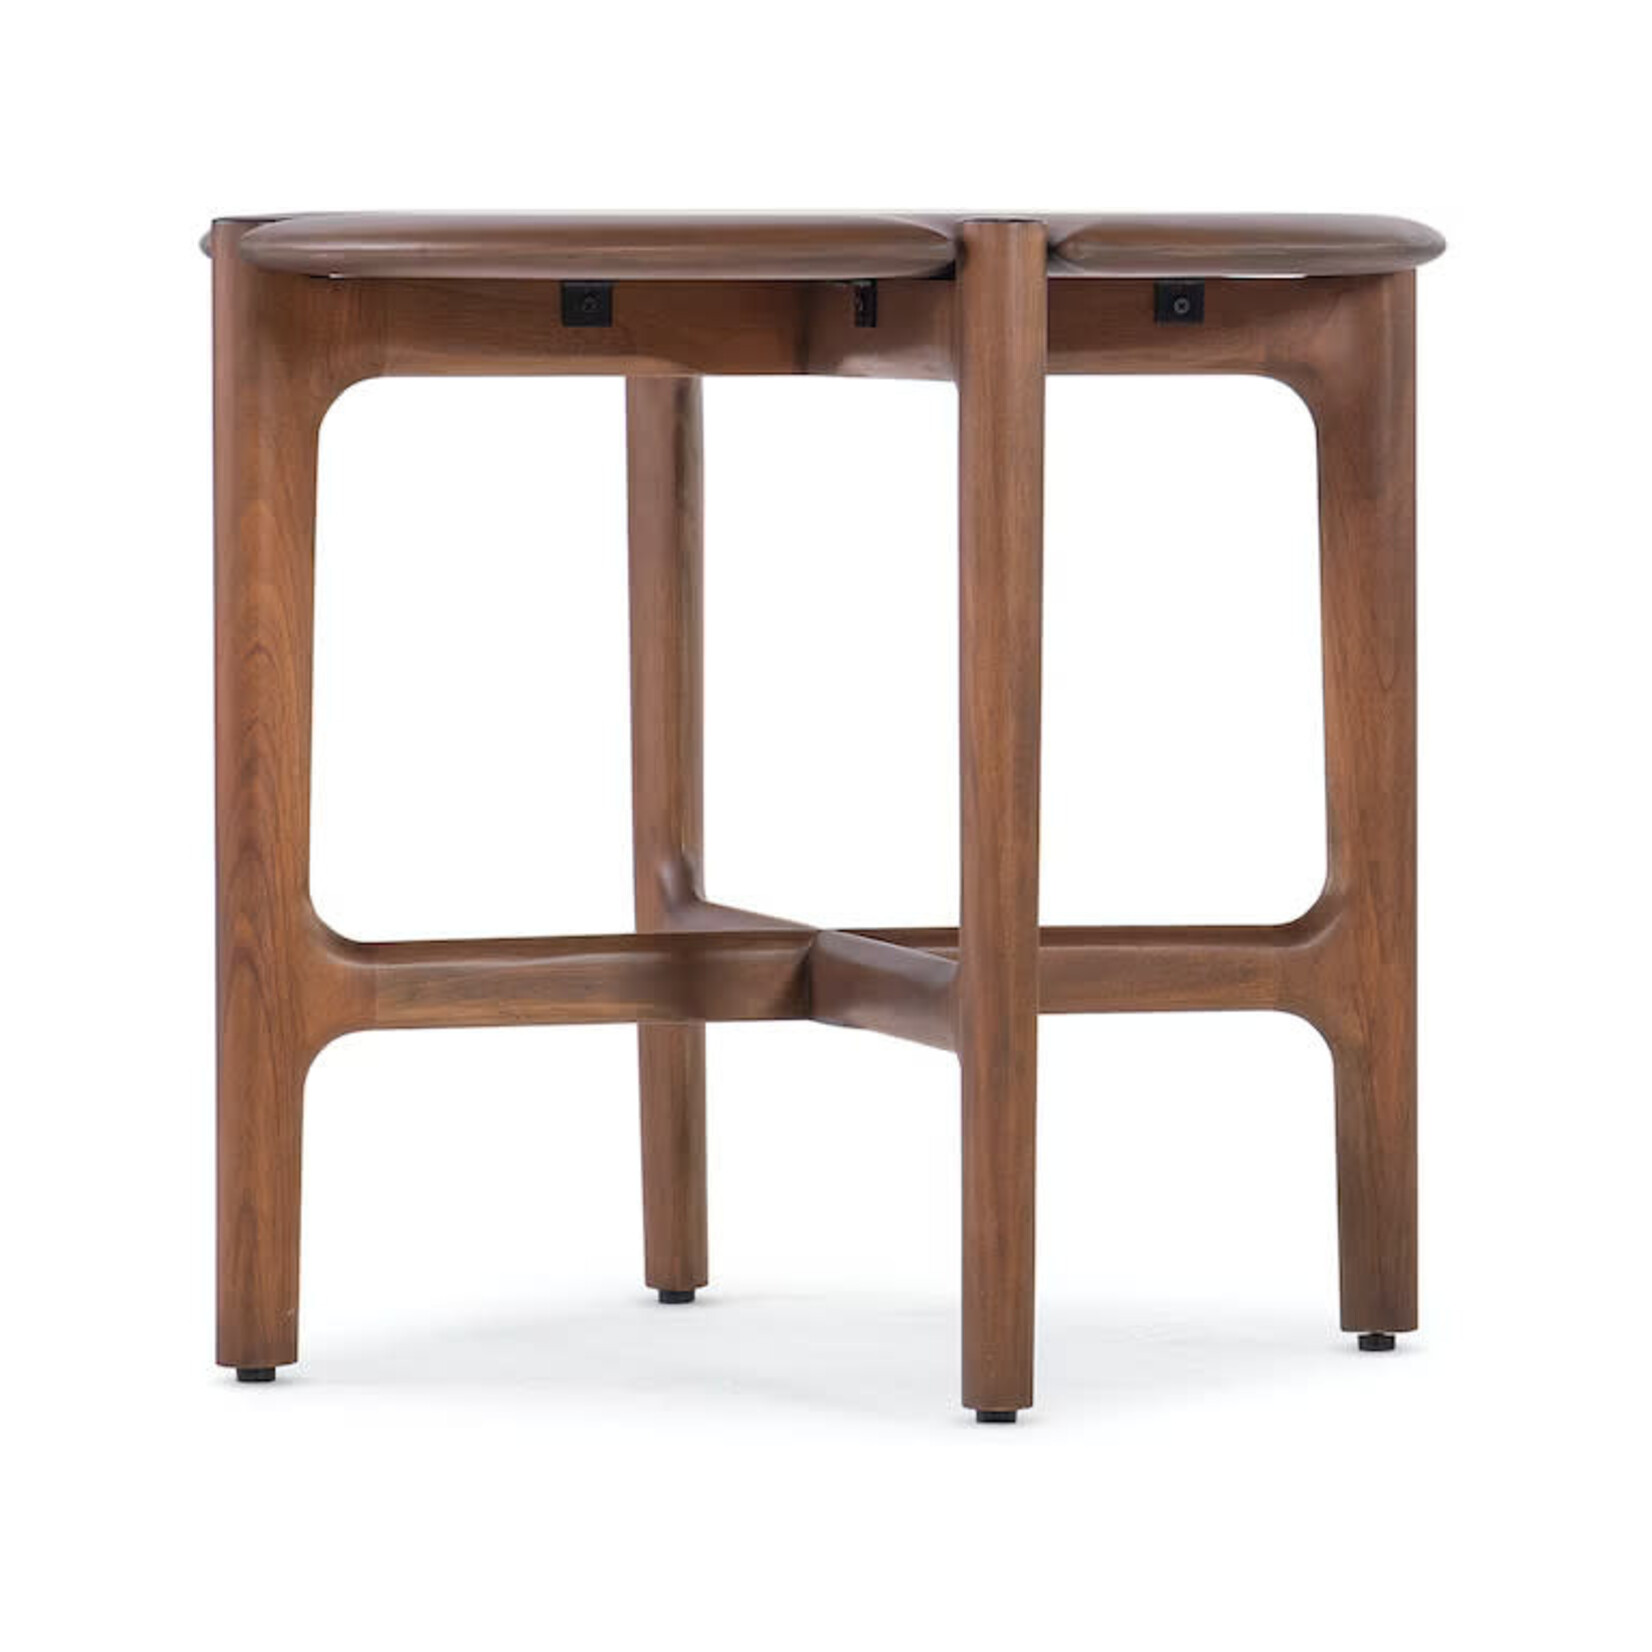 HOOKER FURNITURE HARLOW ROUND SIDE TABLE